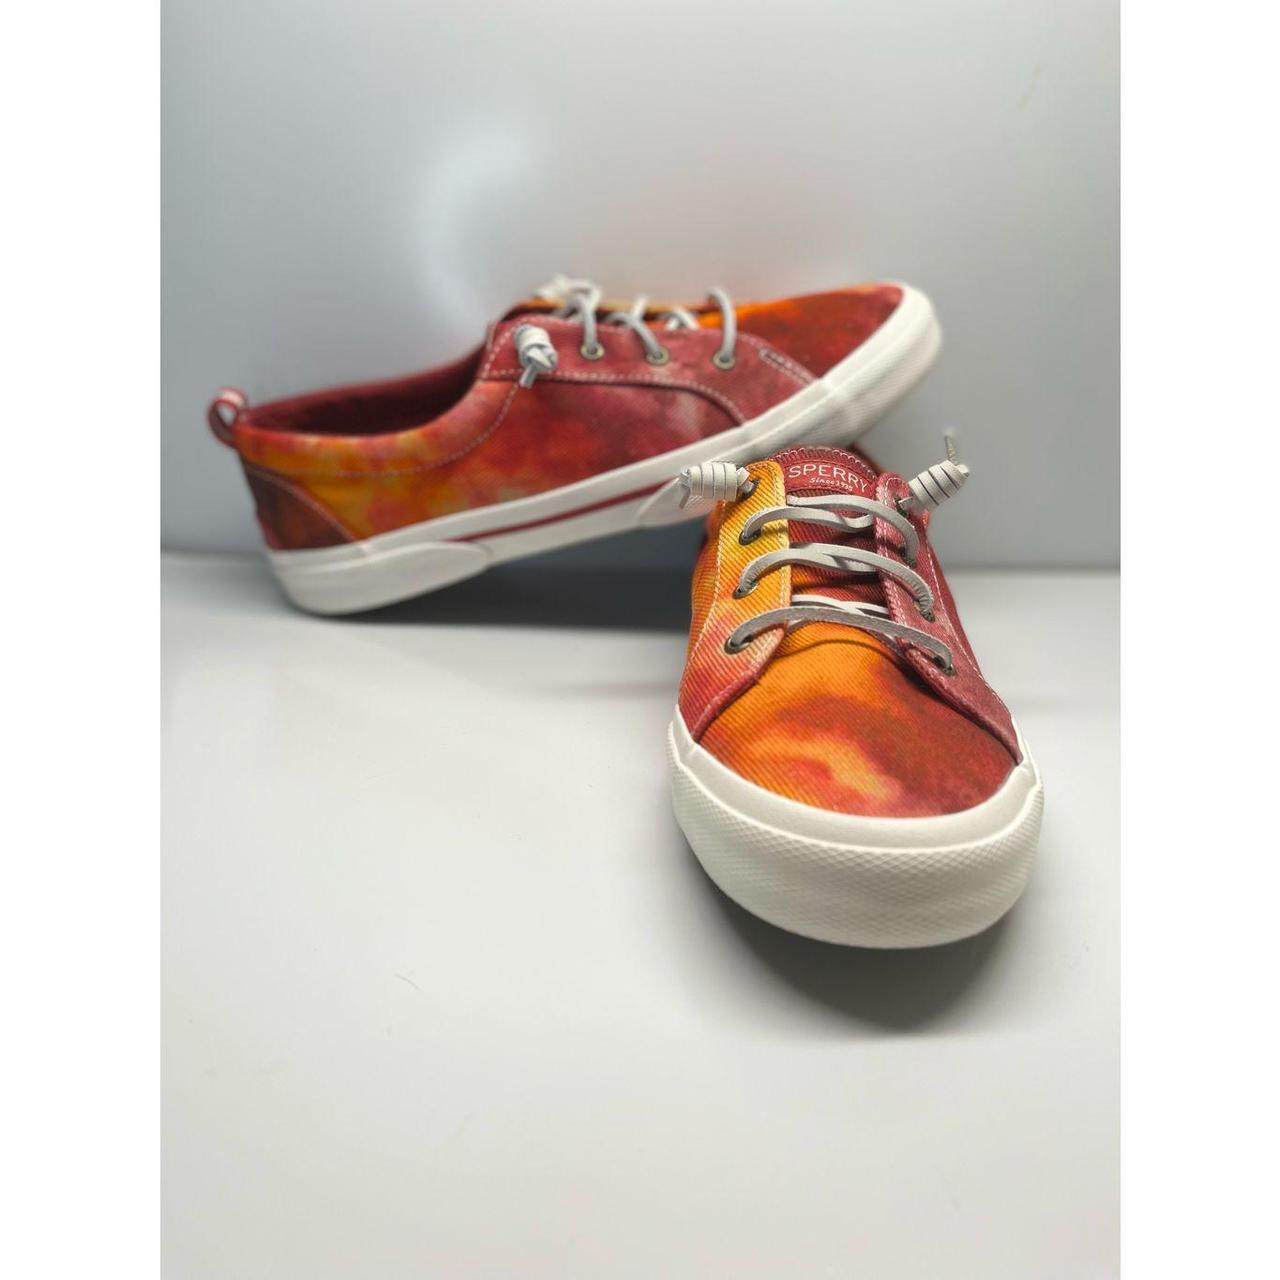 Sperry Women's Orange and Red Loafers (4)